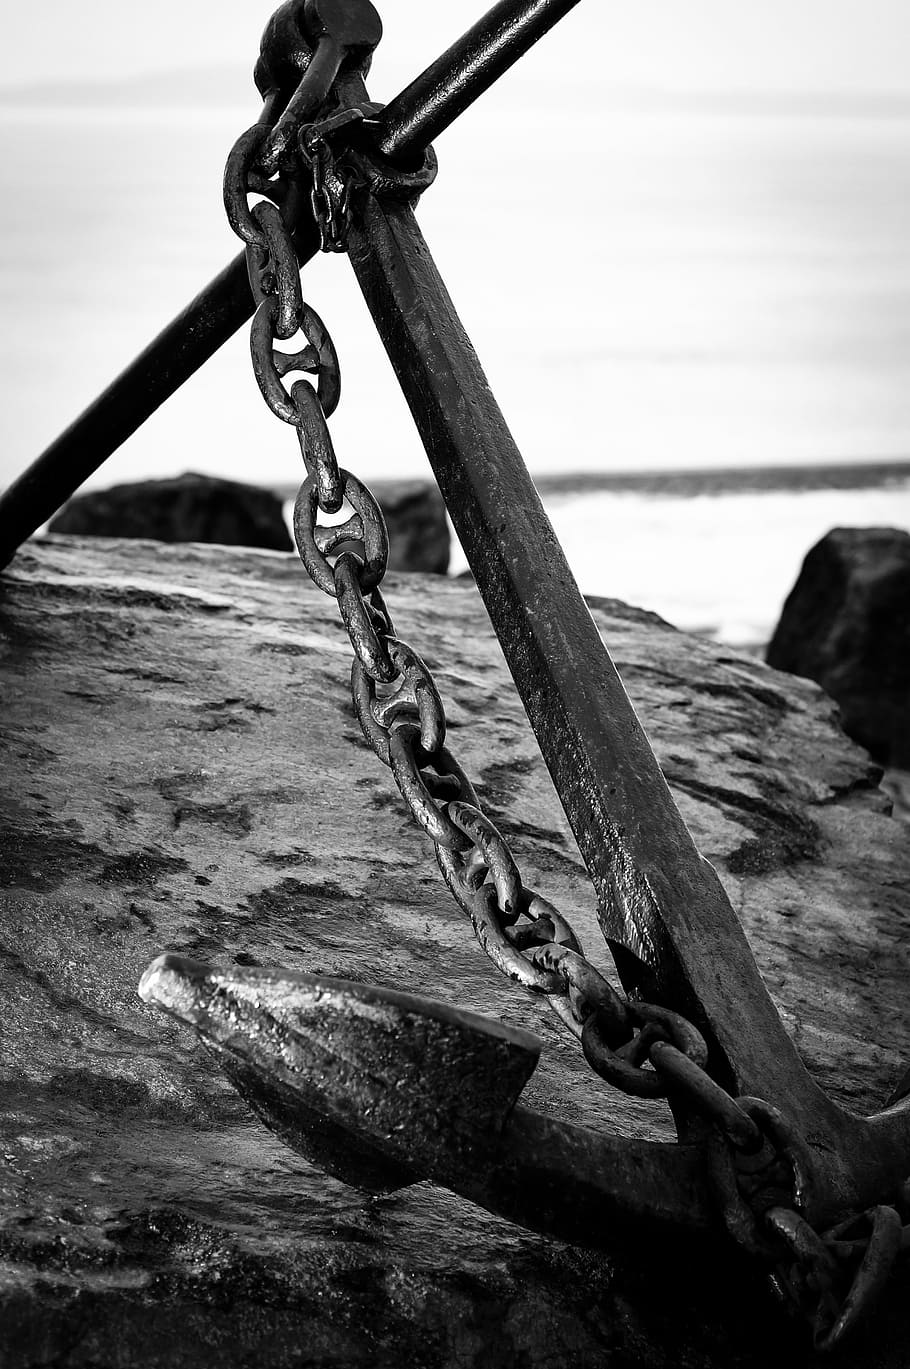 HD wallpaper: anchor, stone, rock, chain, bw, huge, metal, water, no people  | Wallpaper Flare